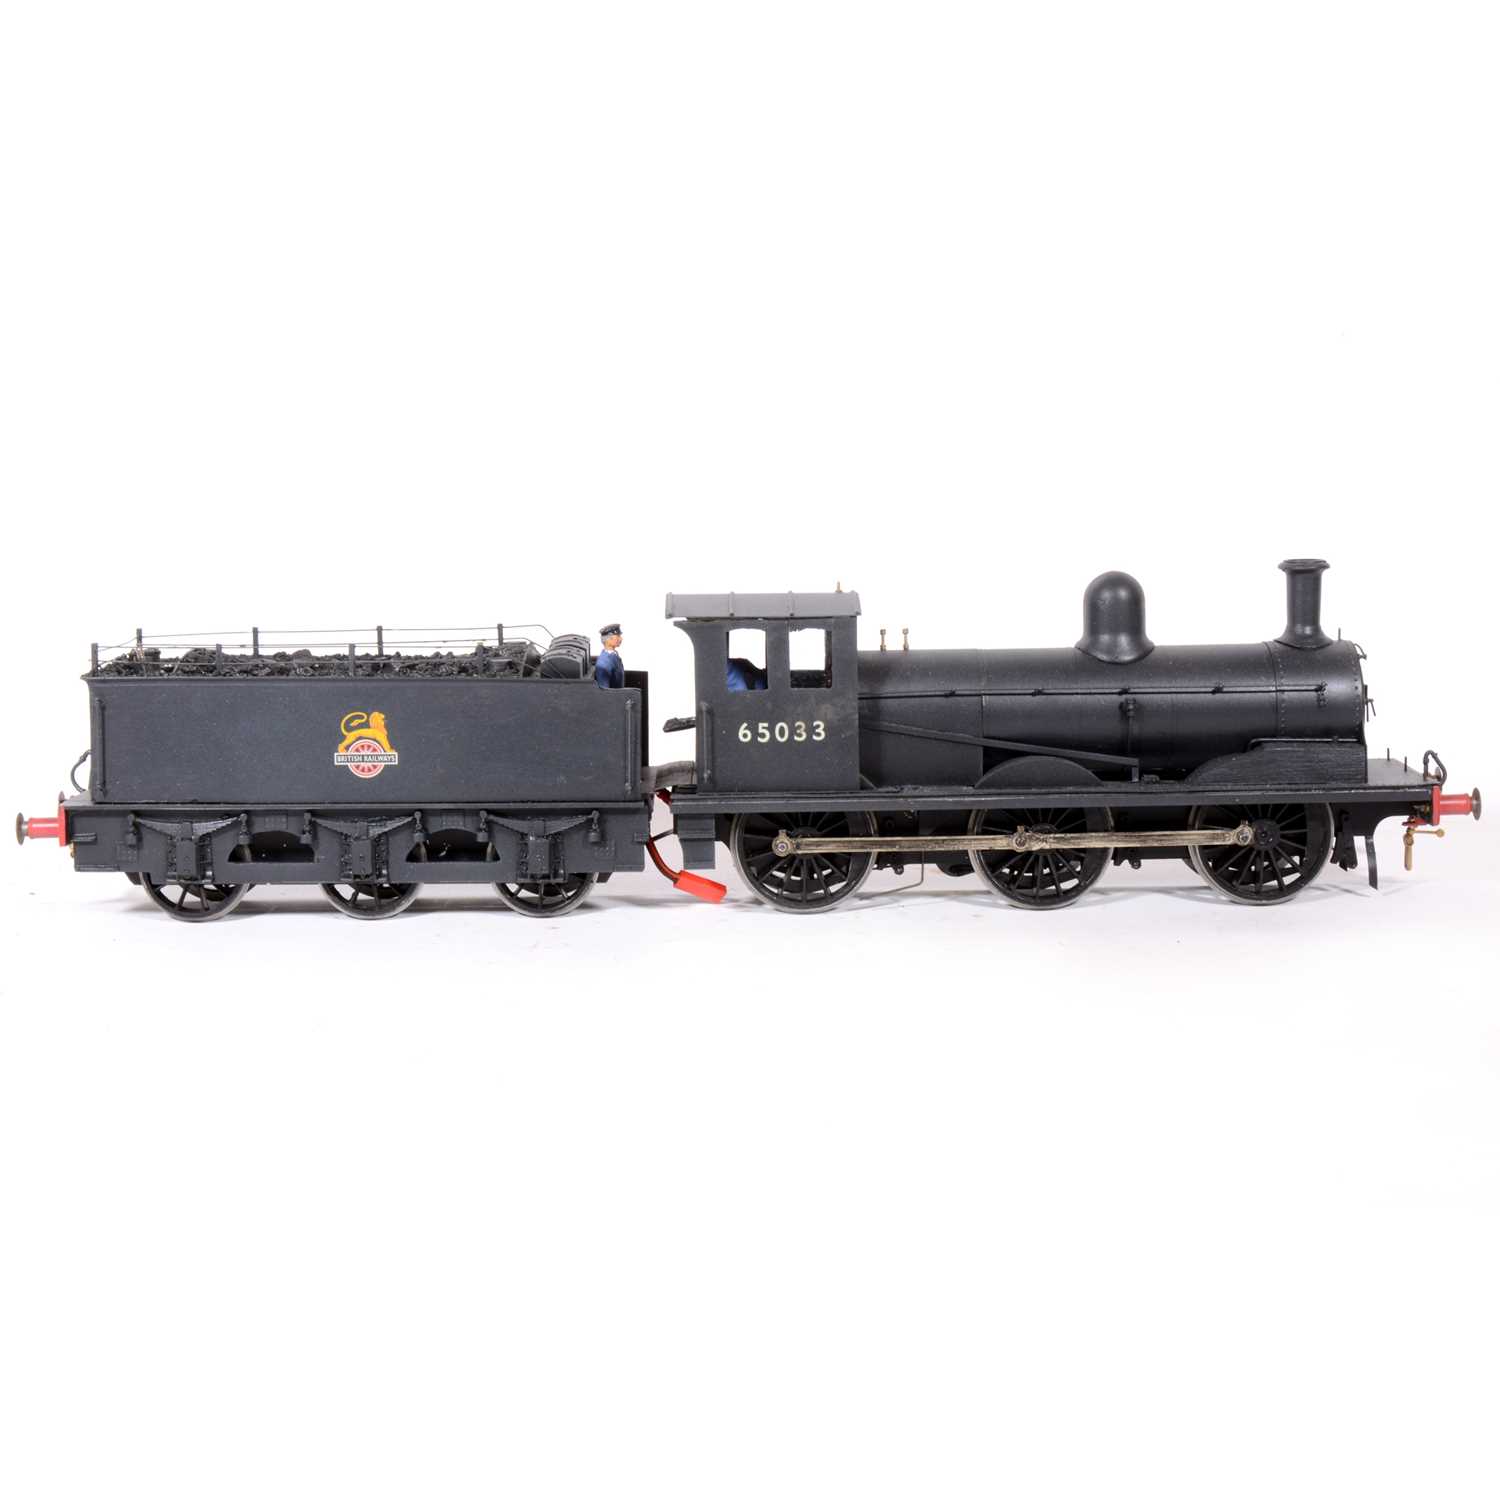 Lot 83 - Malcolm Mills Model Engineer gauge 1 / G scale, 45mm electric locomotive, 0-6-0, class J21 freight no.65033, BR black livery, with tender.